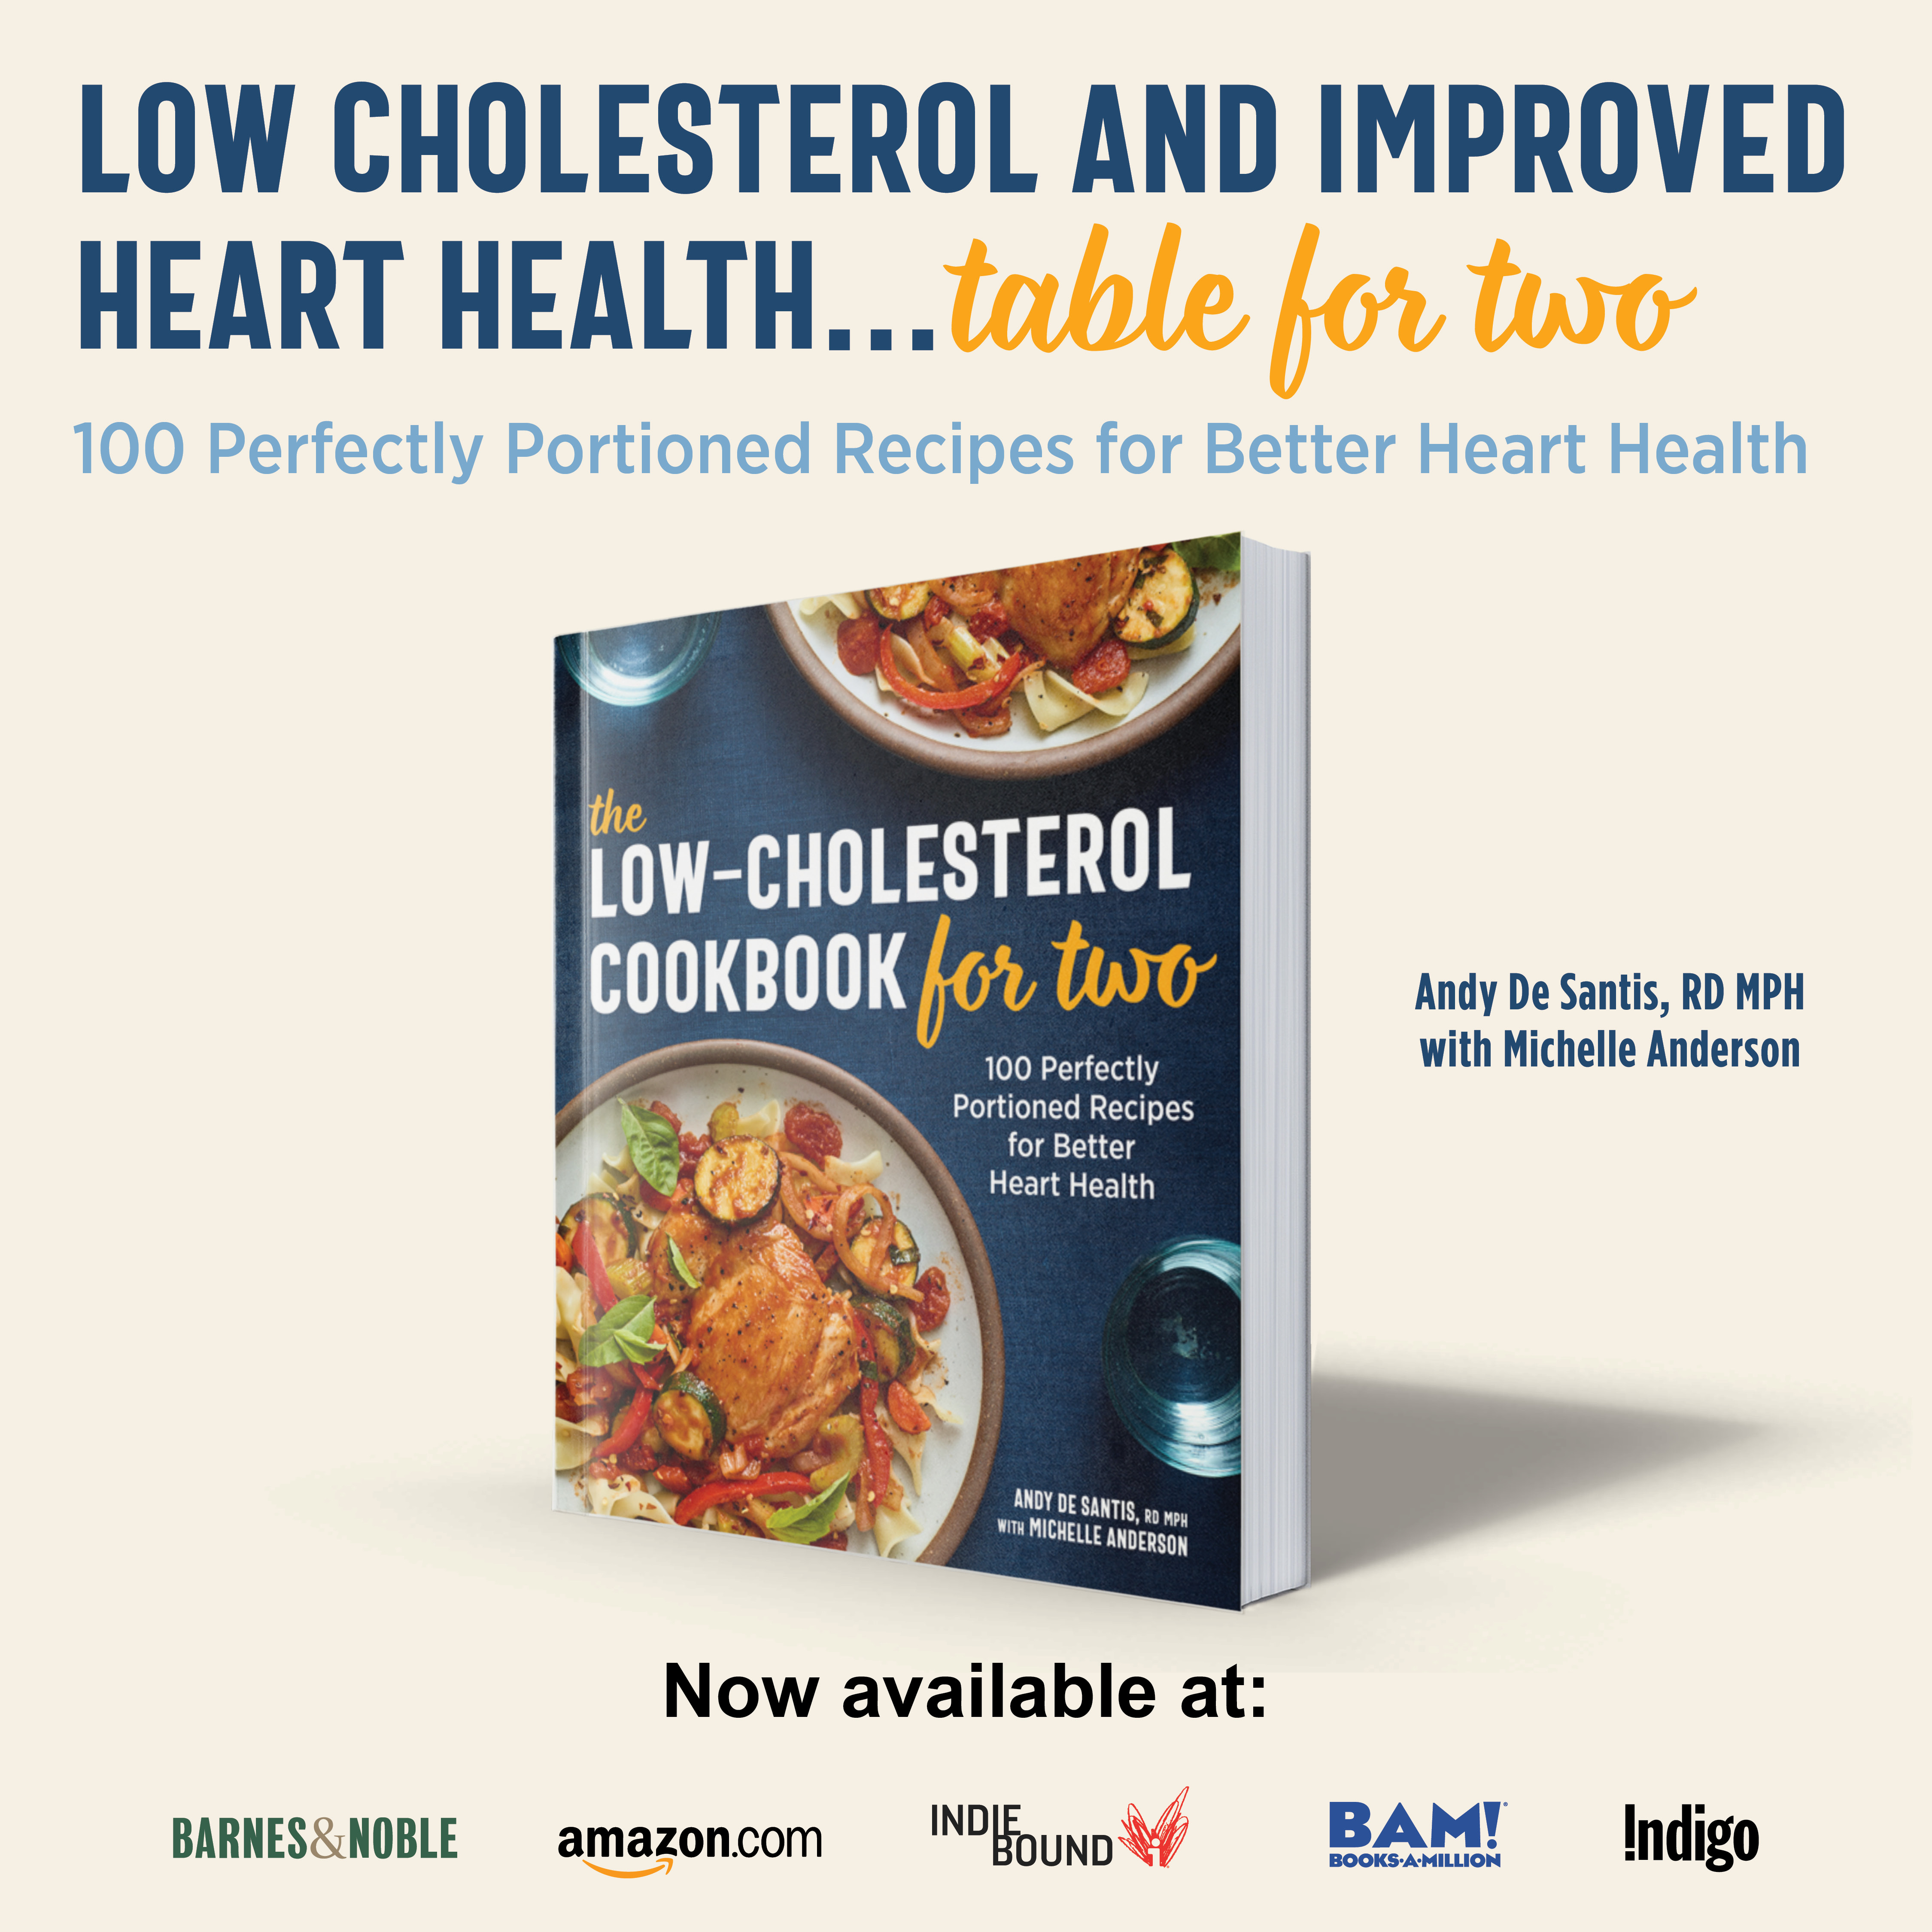 Soy protein helps lower bad cholesterol a small but important